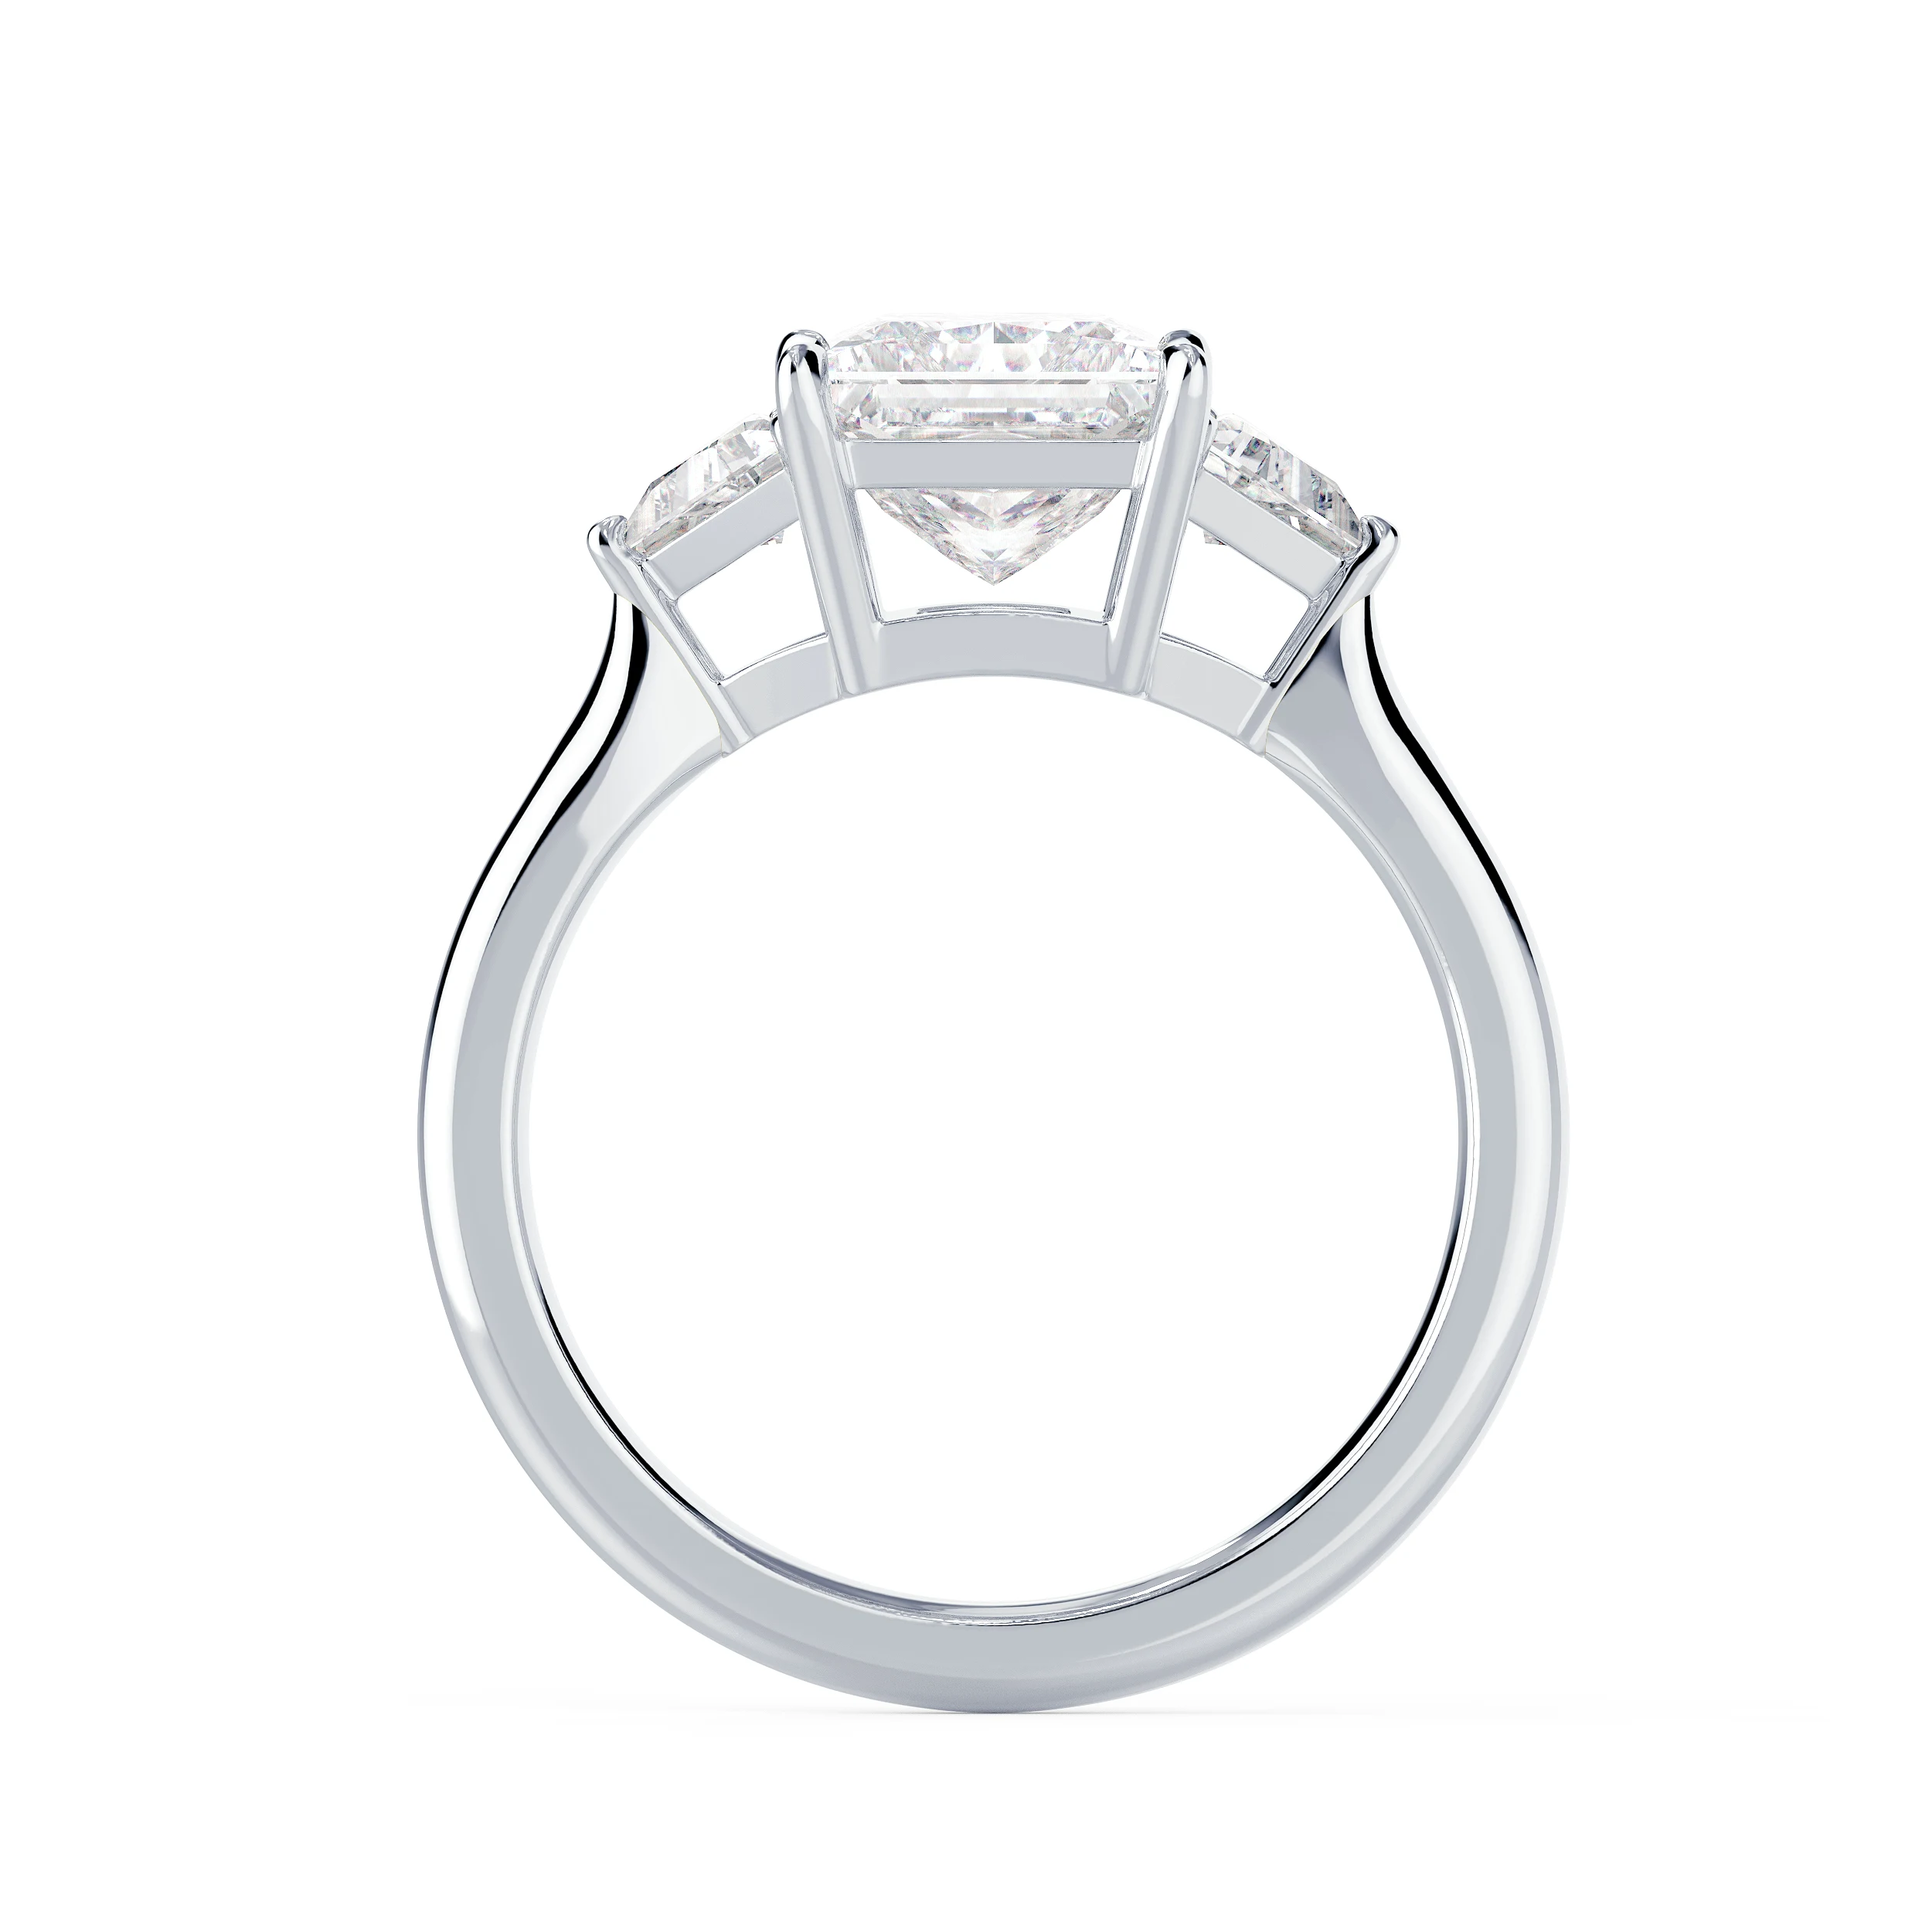 White Gold Princess and Trillion Setting featuring High Quality Diamonds (Profile View)